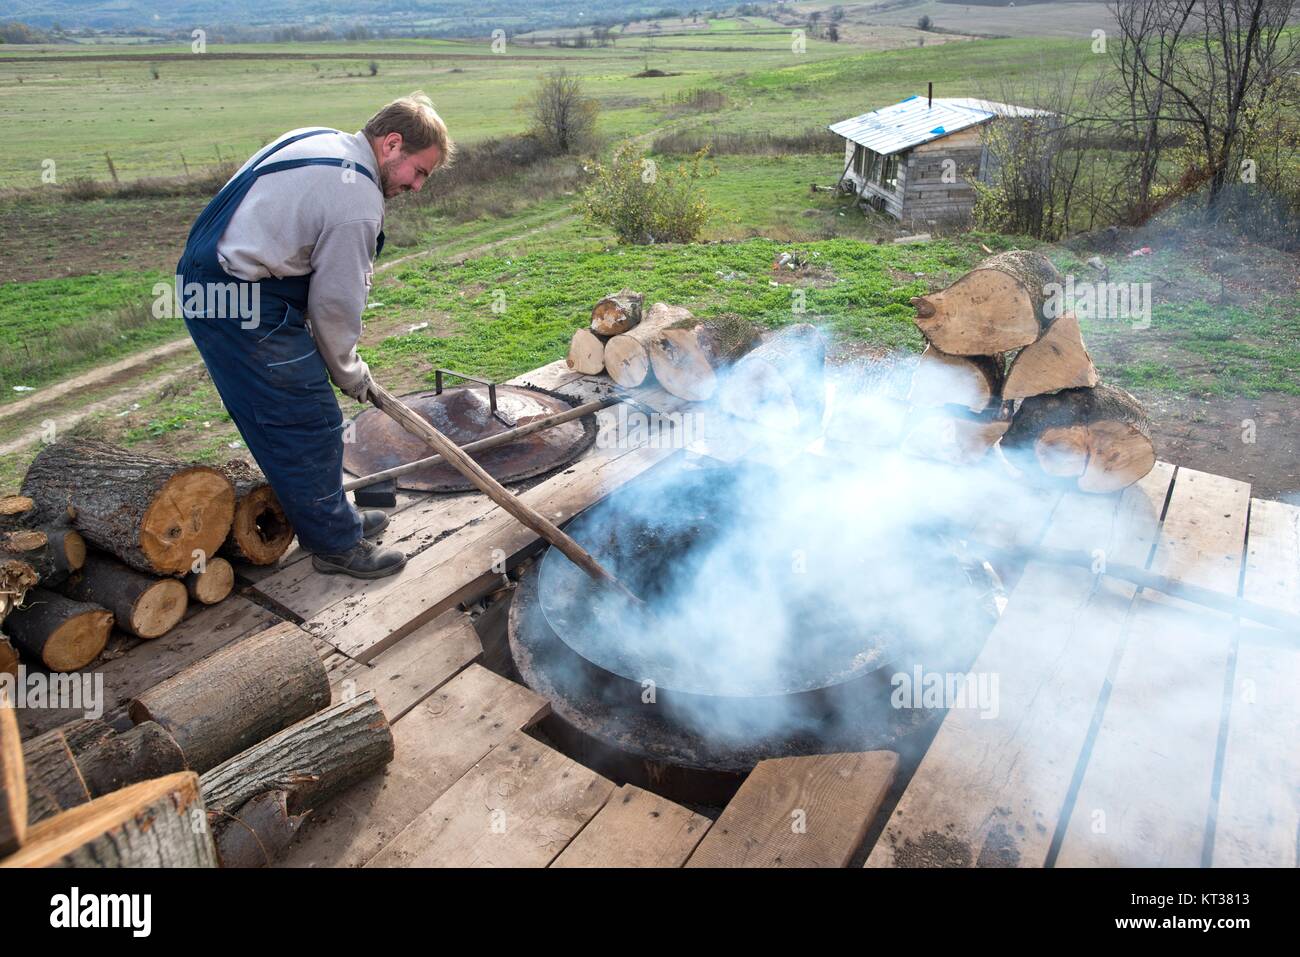 Traditional Charcoal production in rural Boljevac, Serbia Stock Photo